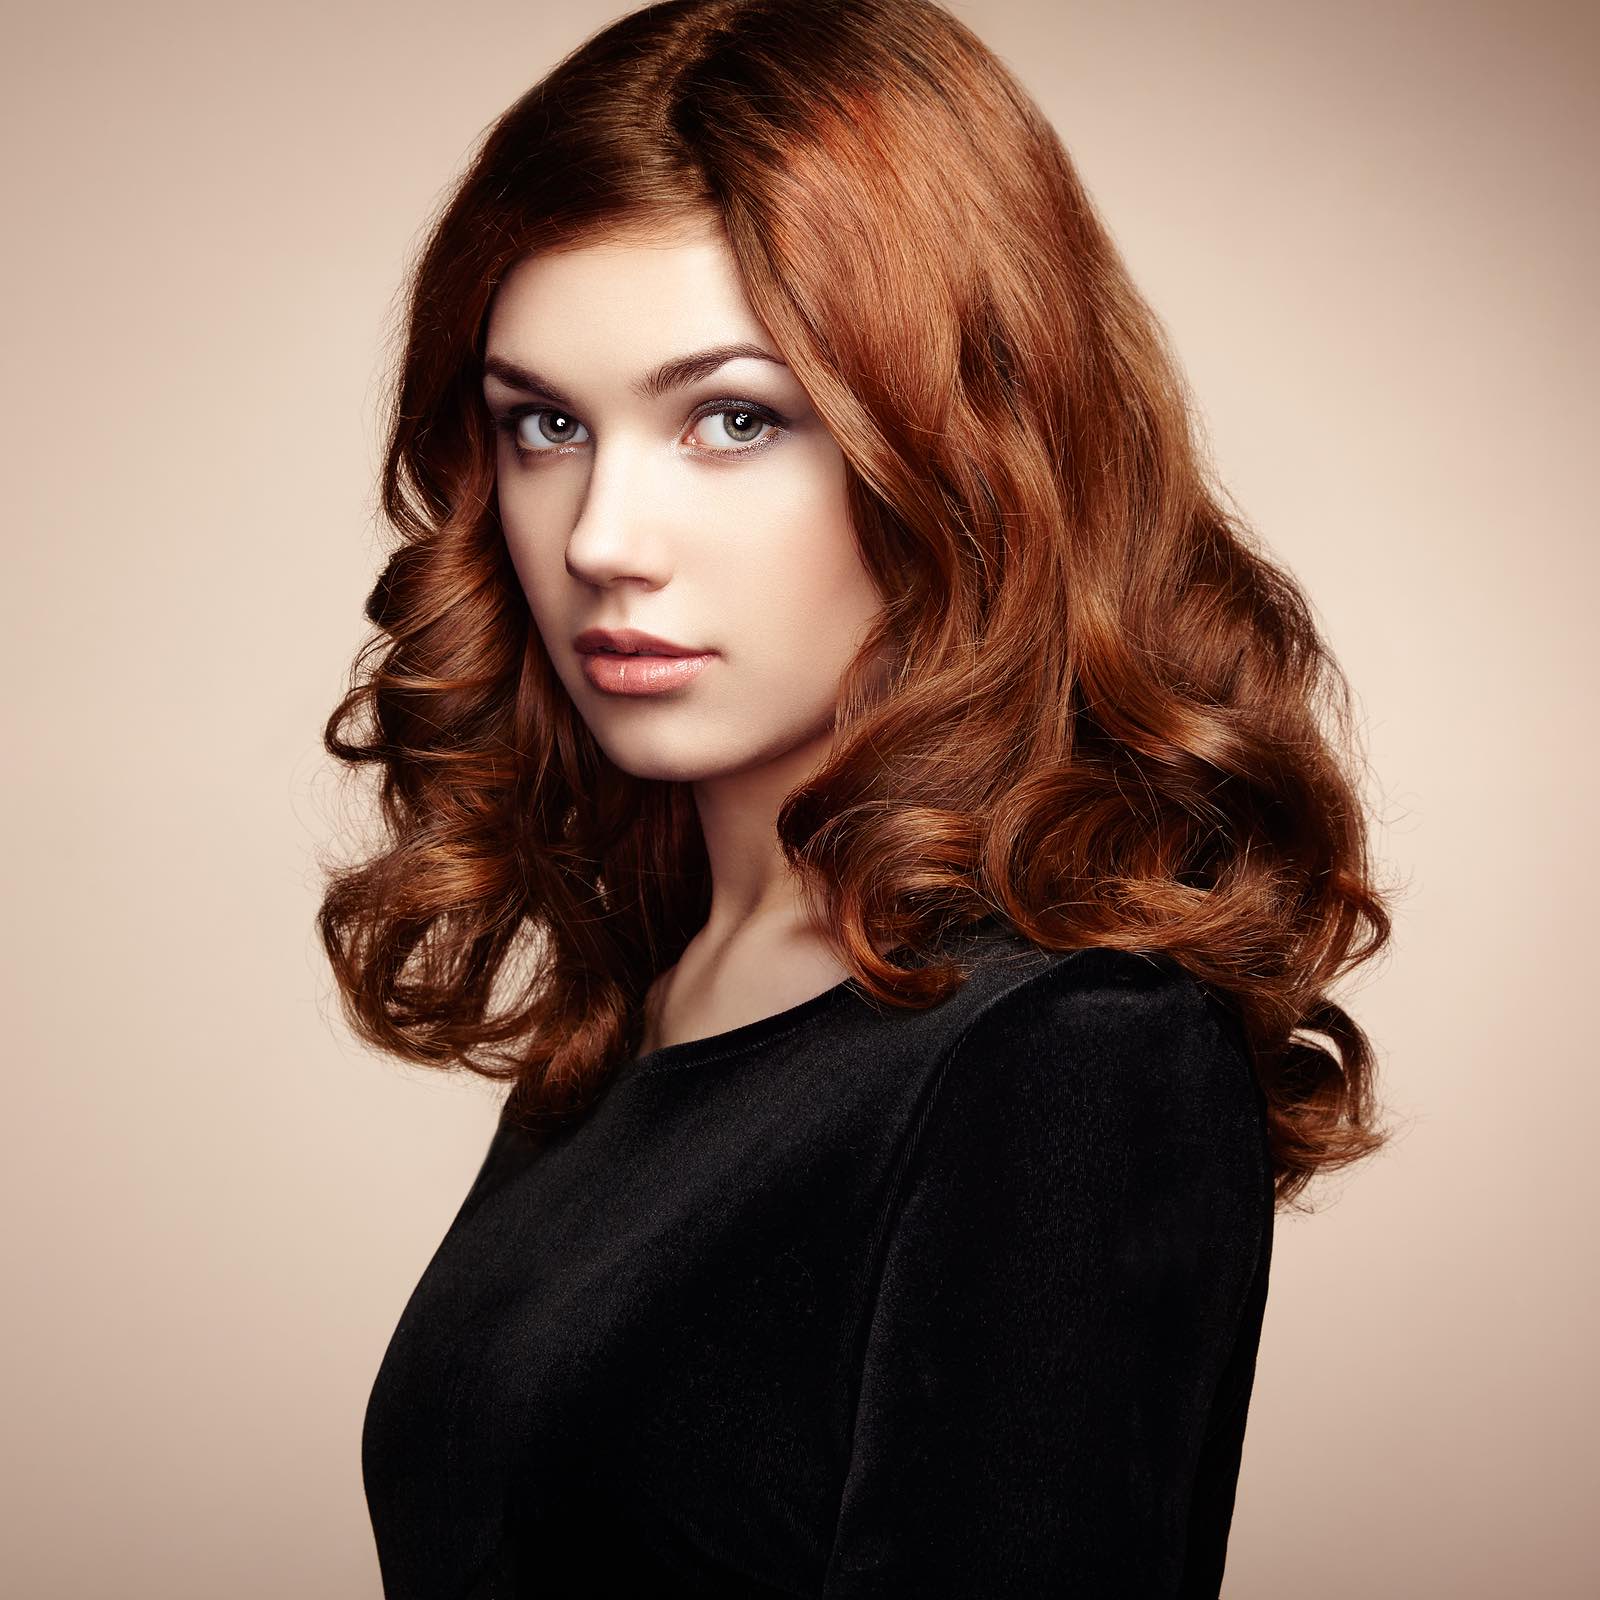 Fashion Portrait Of Elegant Woman With Magnificent Hair